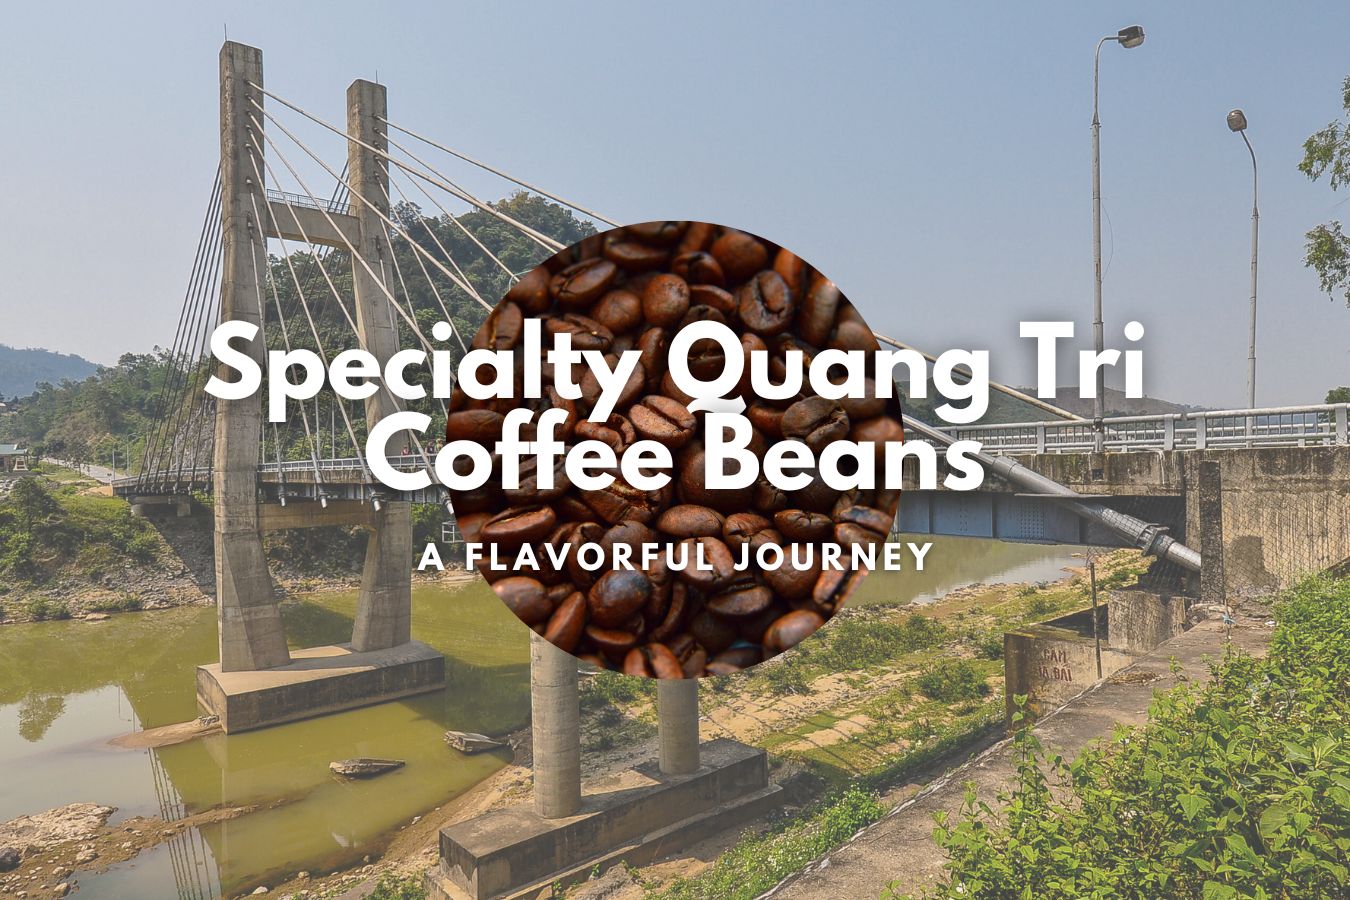 Specialty Quang Tri Coffee Beans: A Flavorful Journey